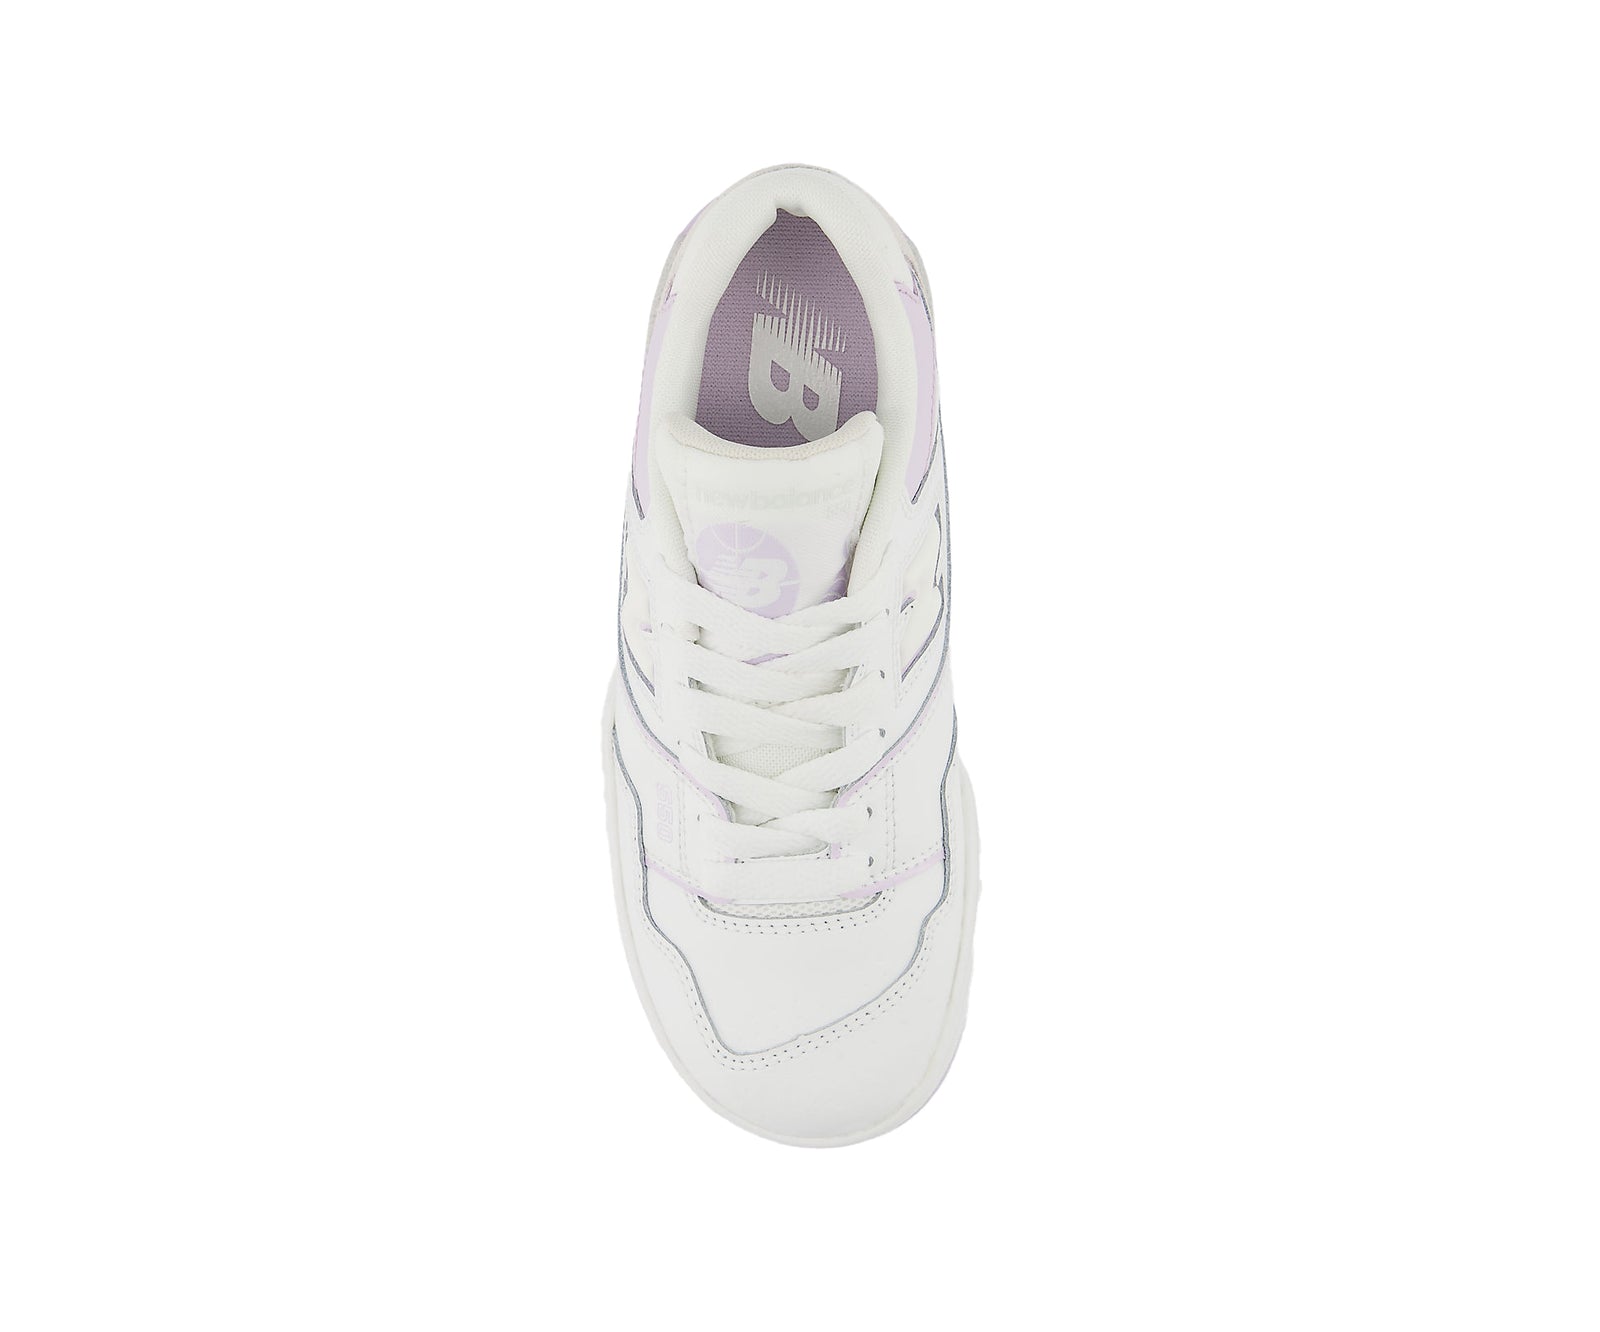 A white and lilac leather shoe